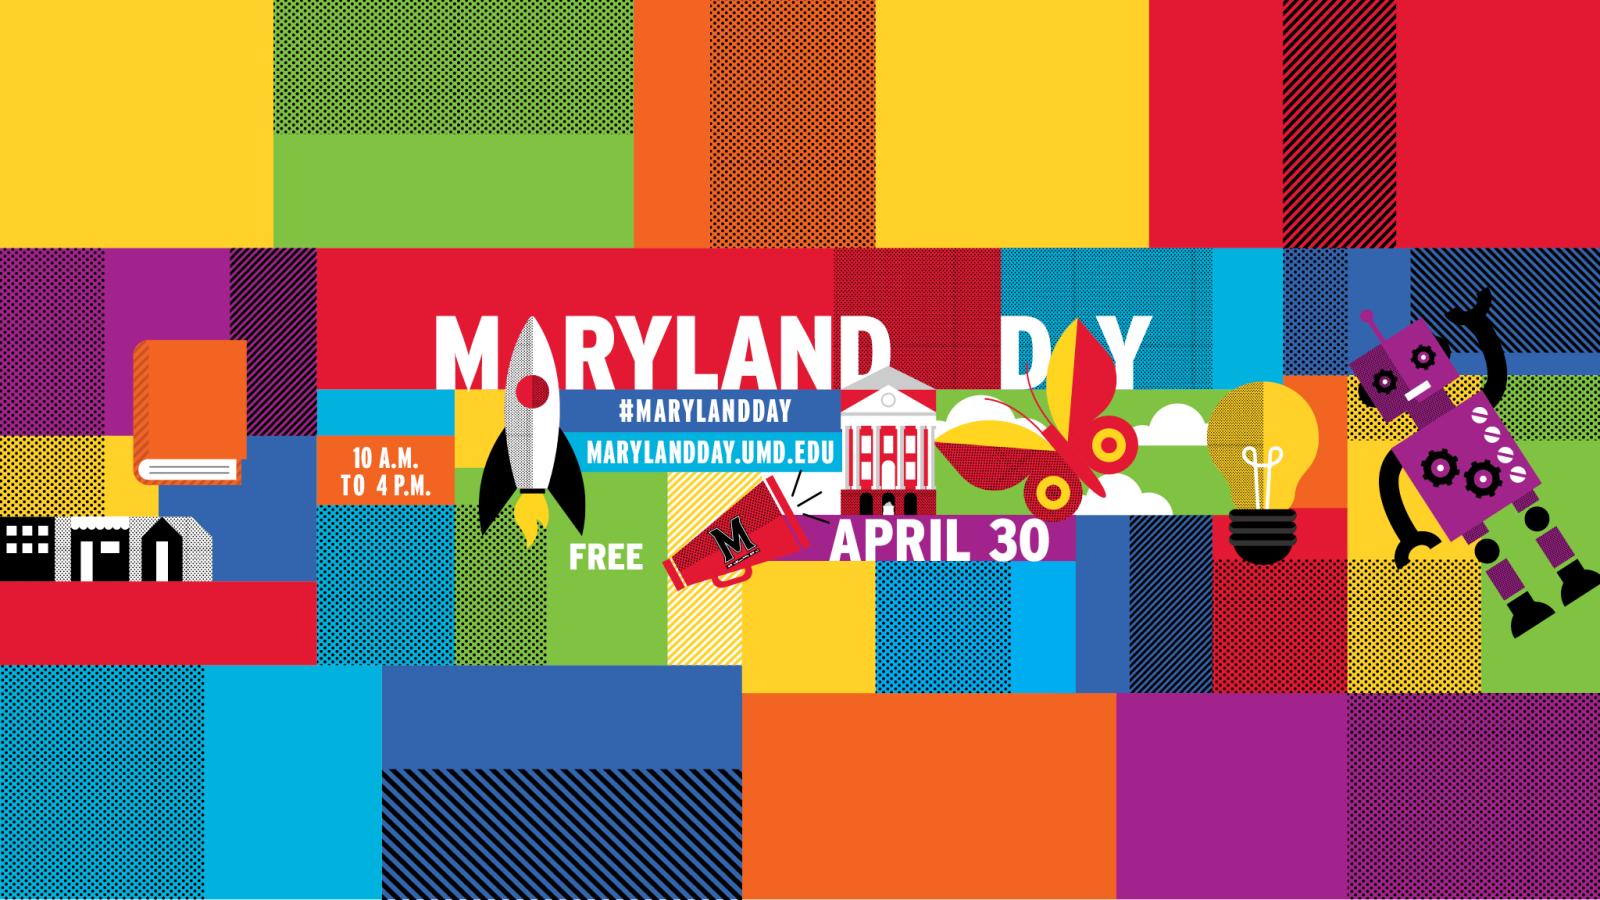 Maryland Day 2022 colorful graphic with text and icons